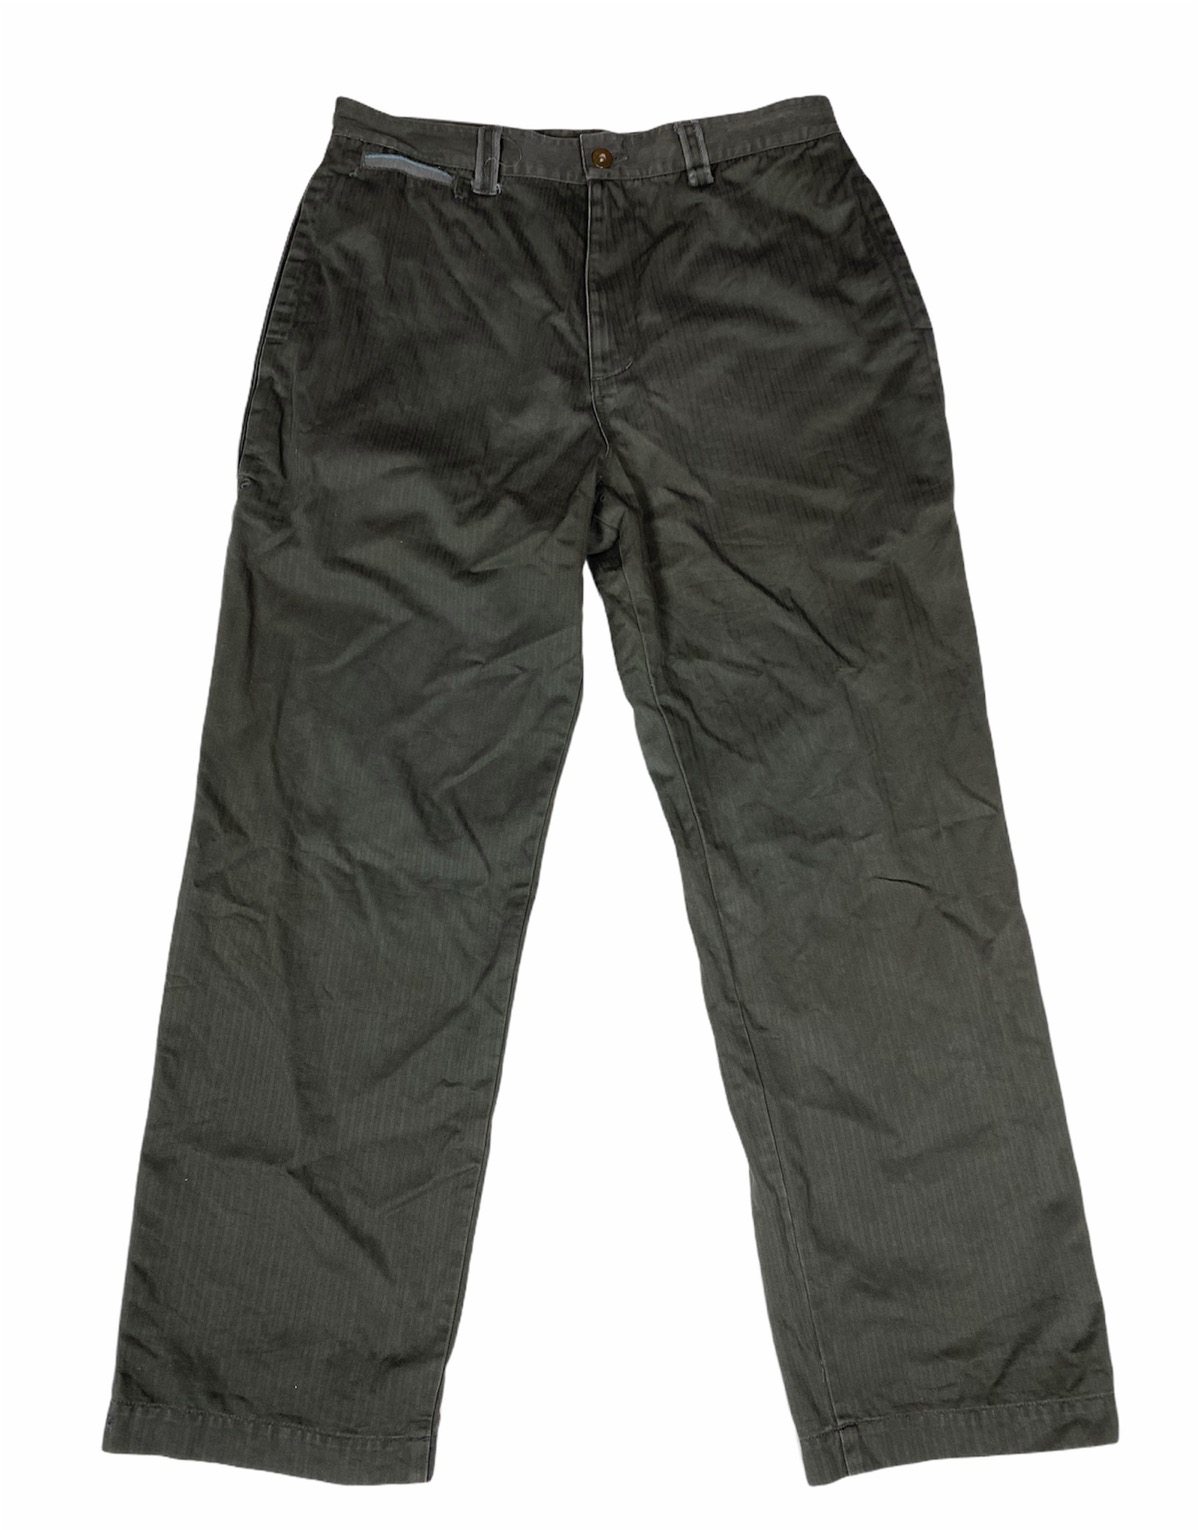 Japanese Brand - Mad Hectic Trousers Pants. S0150 - 1